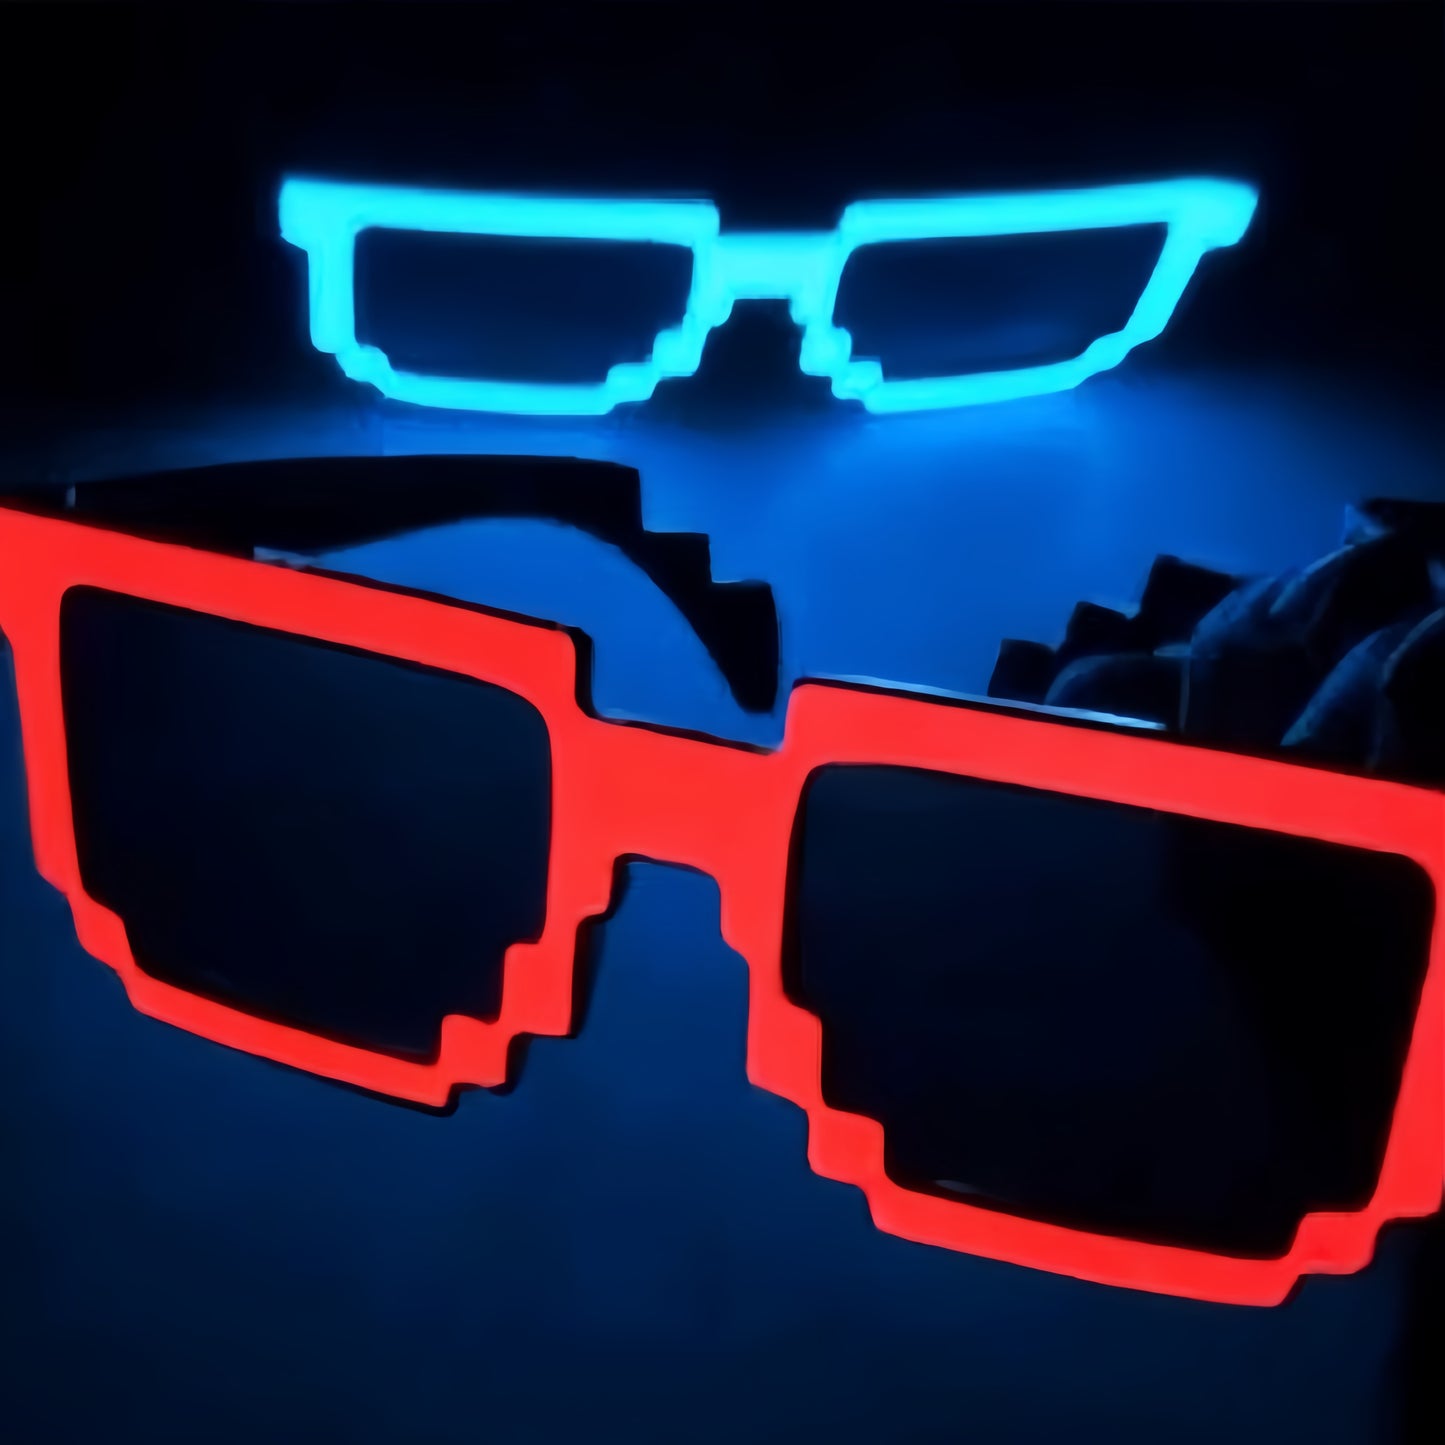 Pack of 2 LED pixel goggles